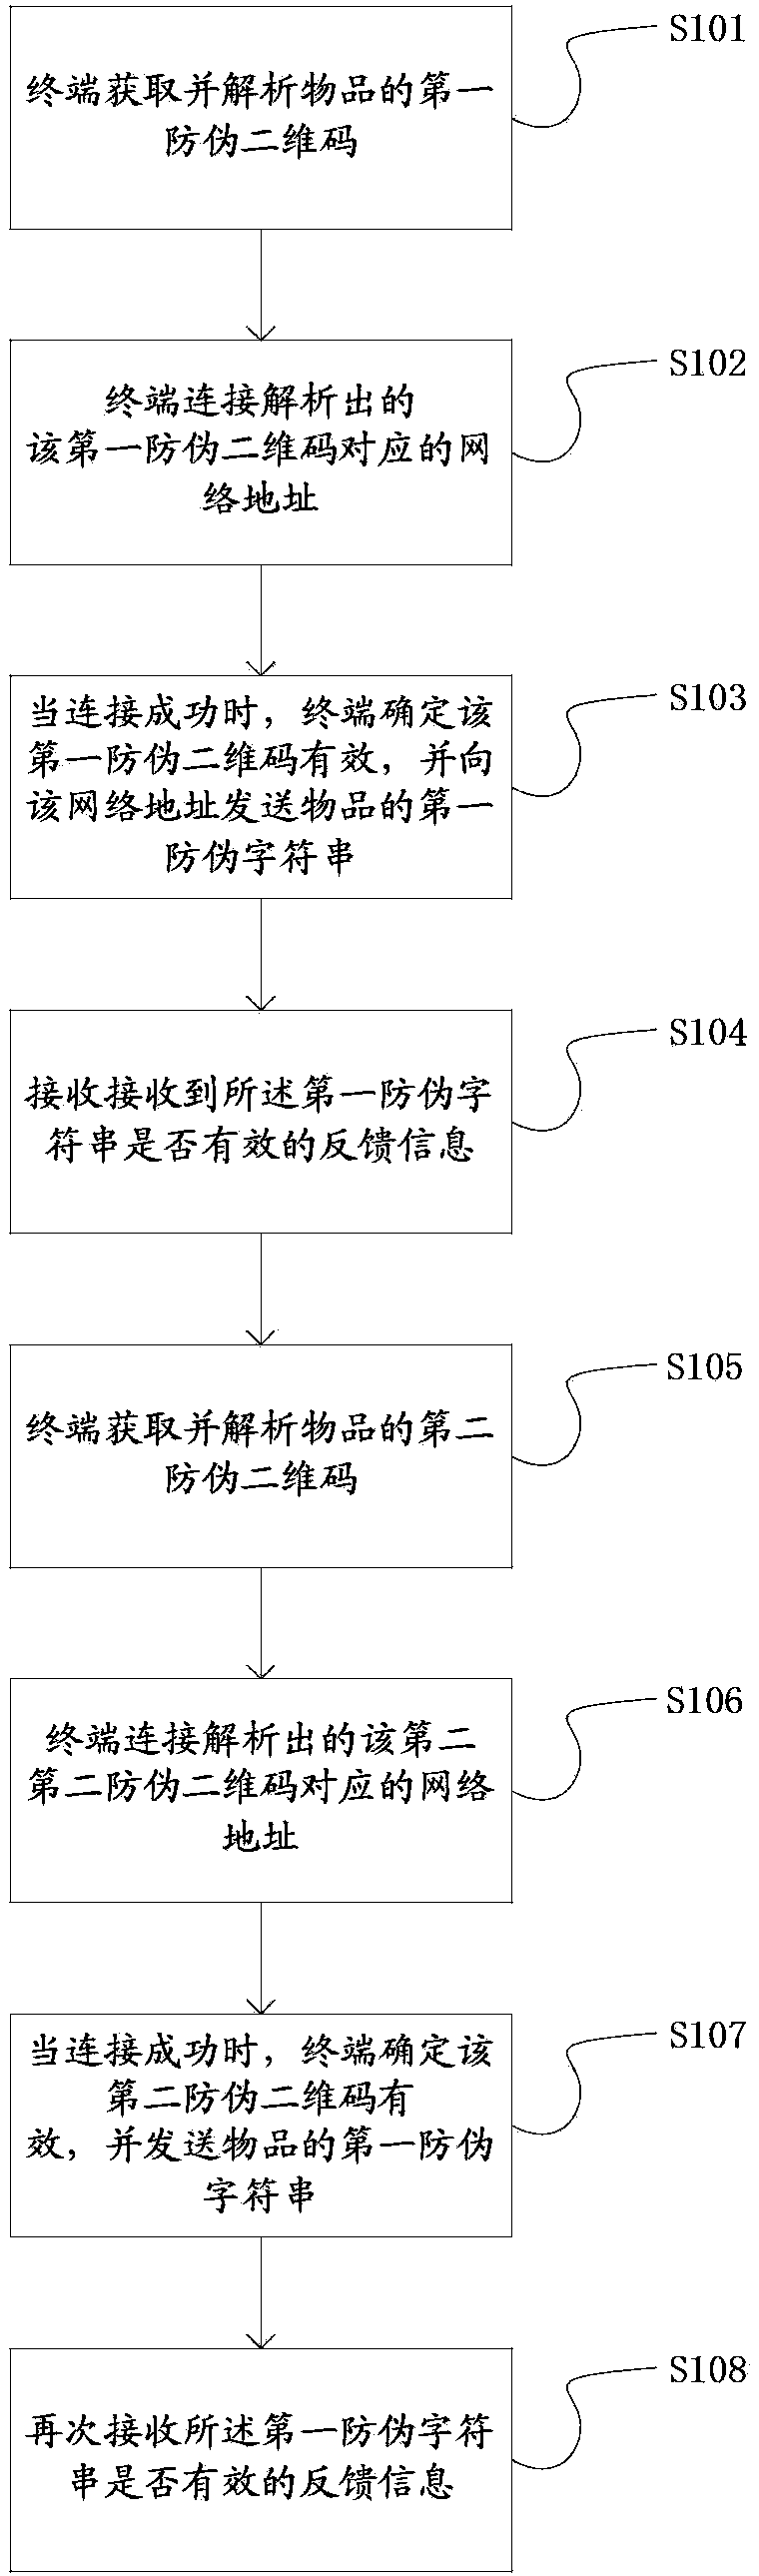 Anti-counterfeiting information verification method and device